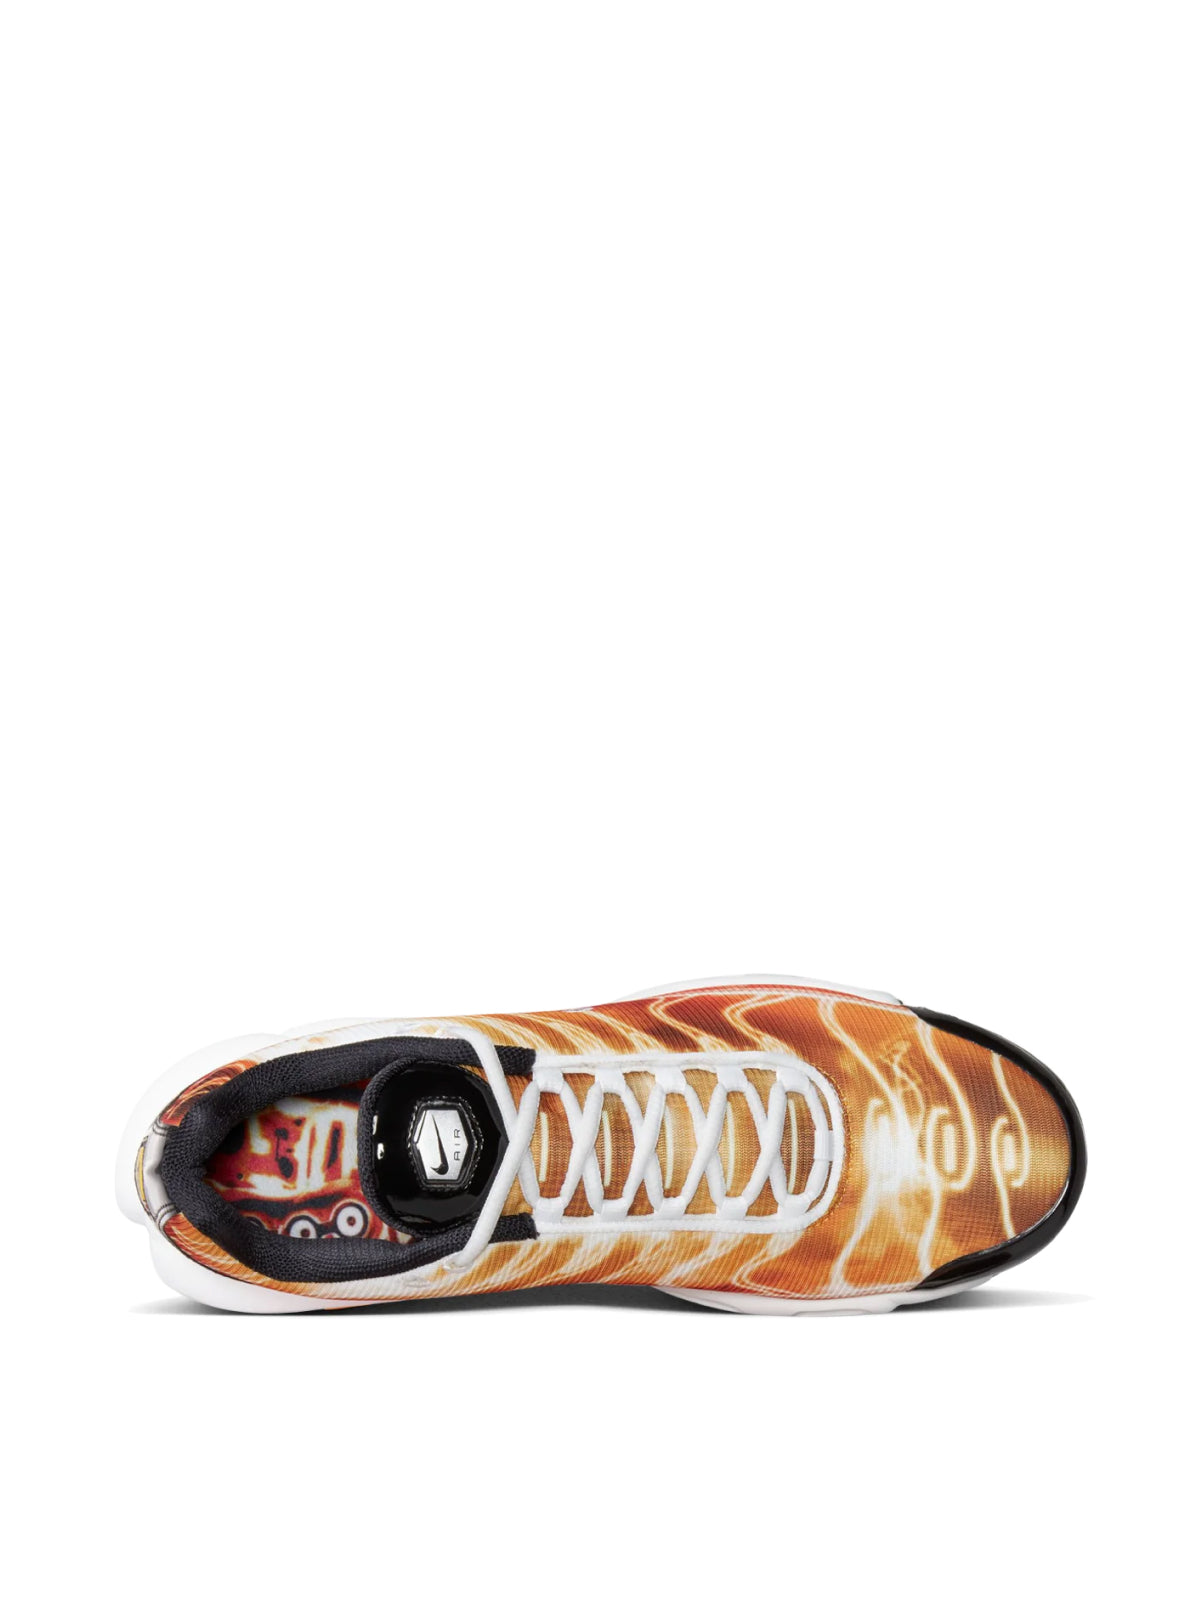 Air Max Plus Og "Light Photography" Sneakers